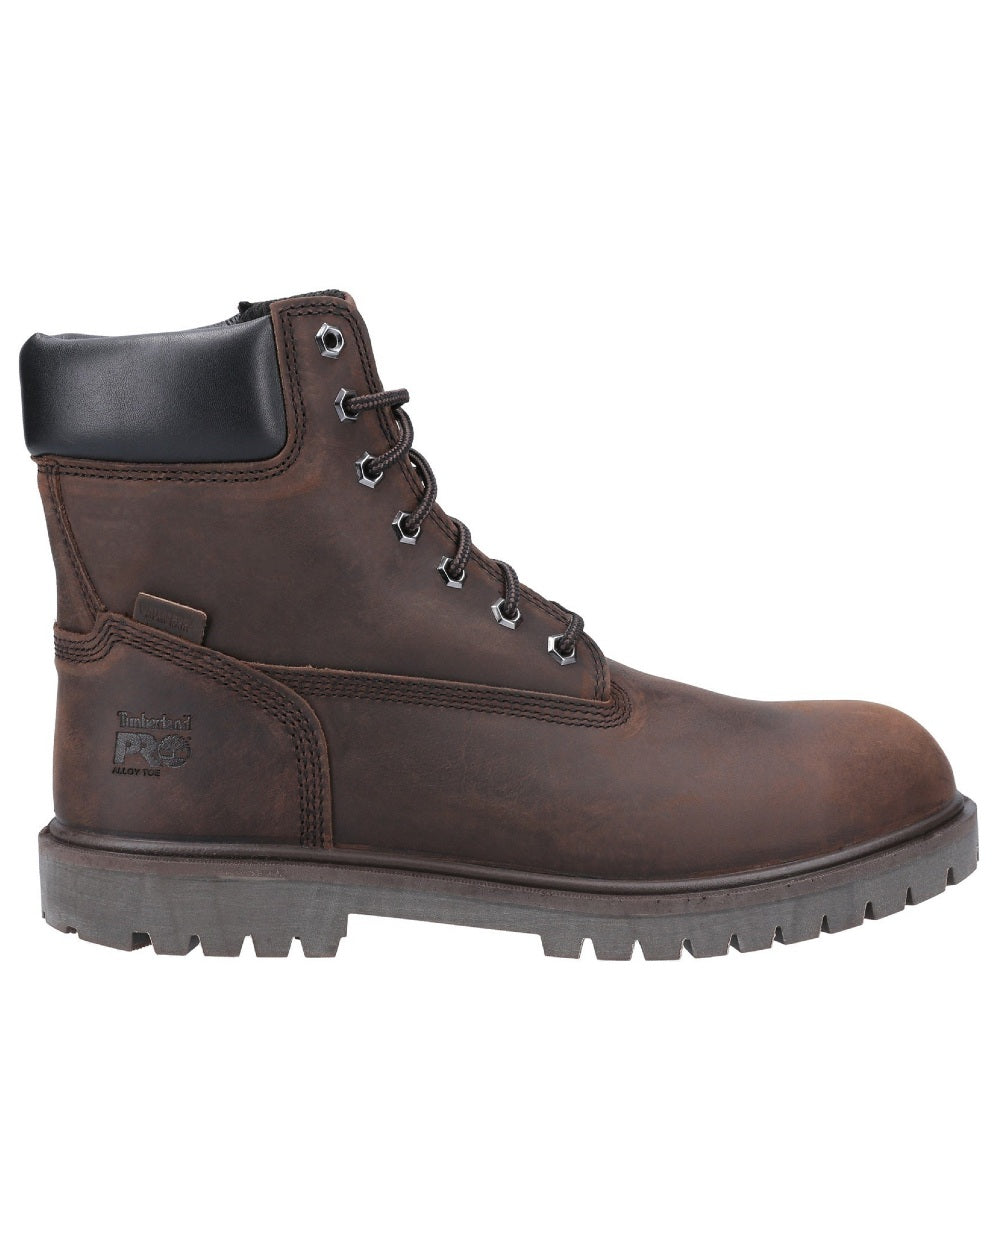 Brown coloured Timberland Pro Iconic Safety Toe Work Boots on white background 